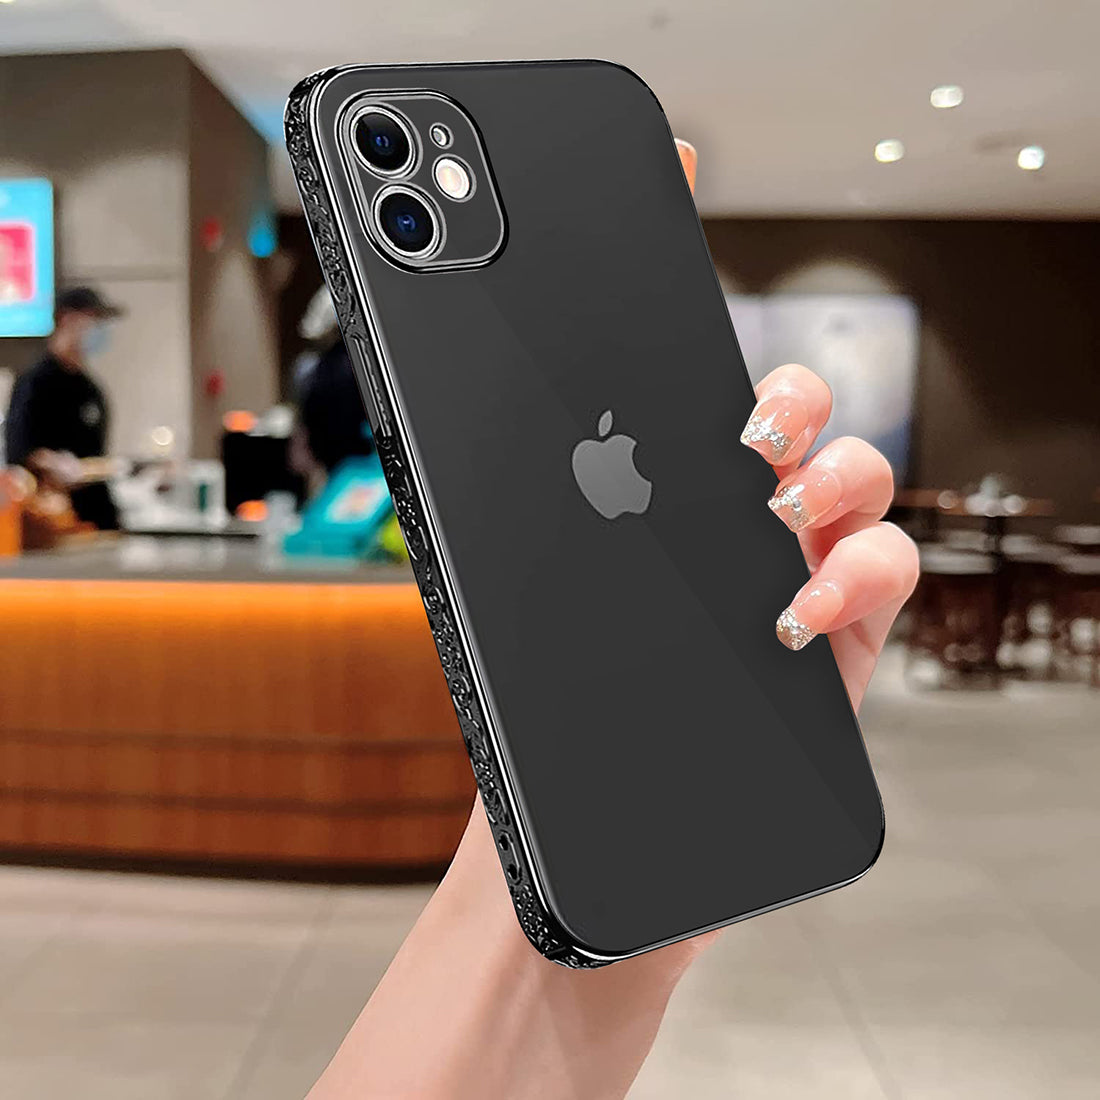 Camera Protection Bumper Cover for Apple iPhone 11